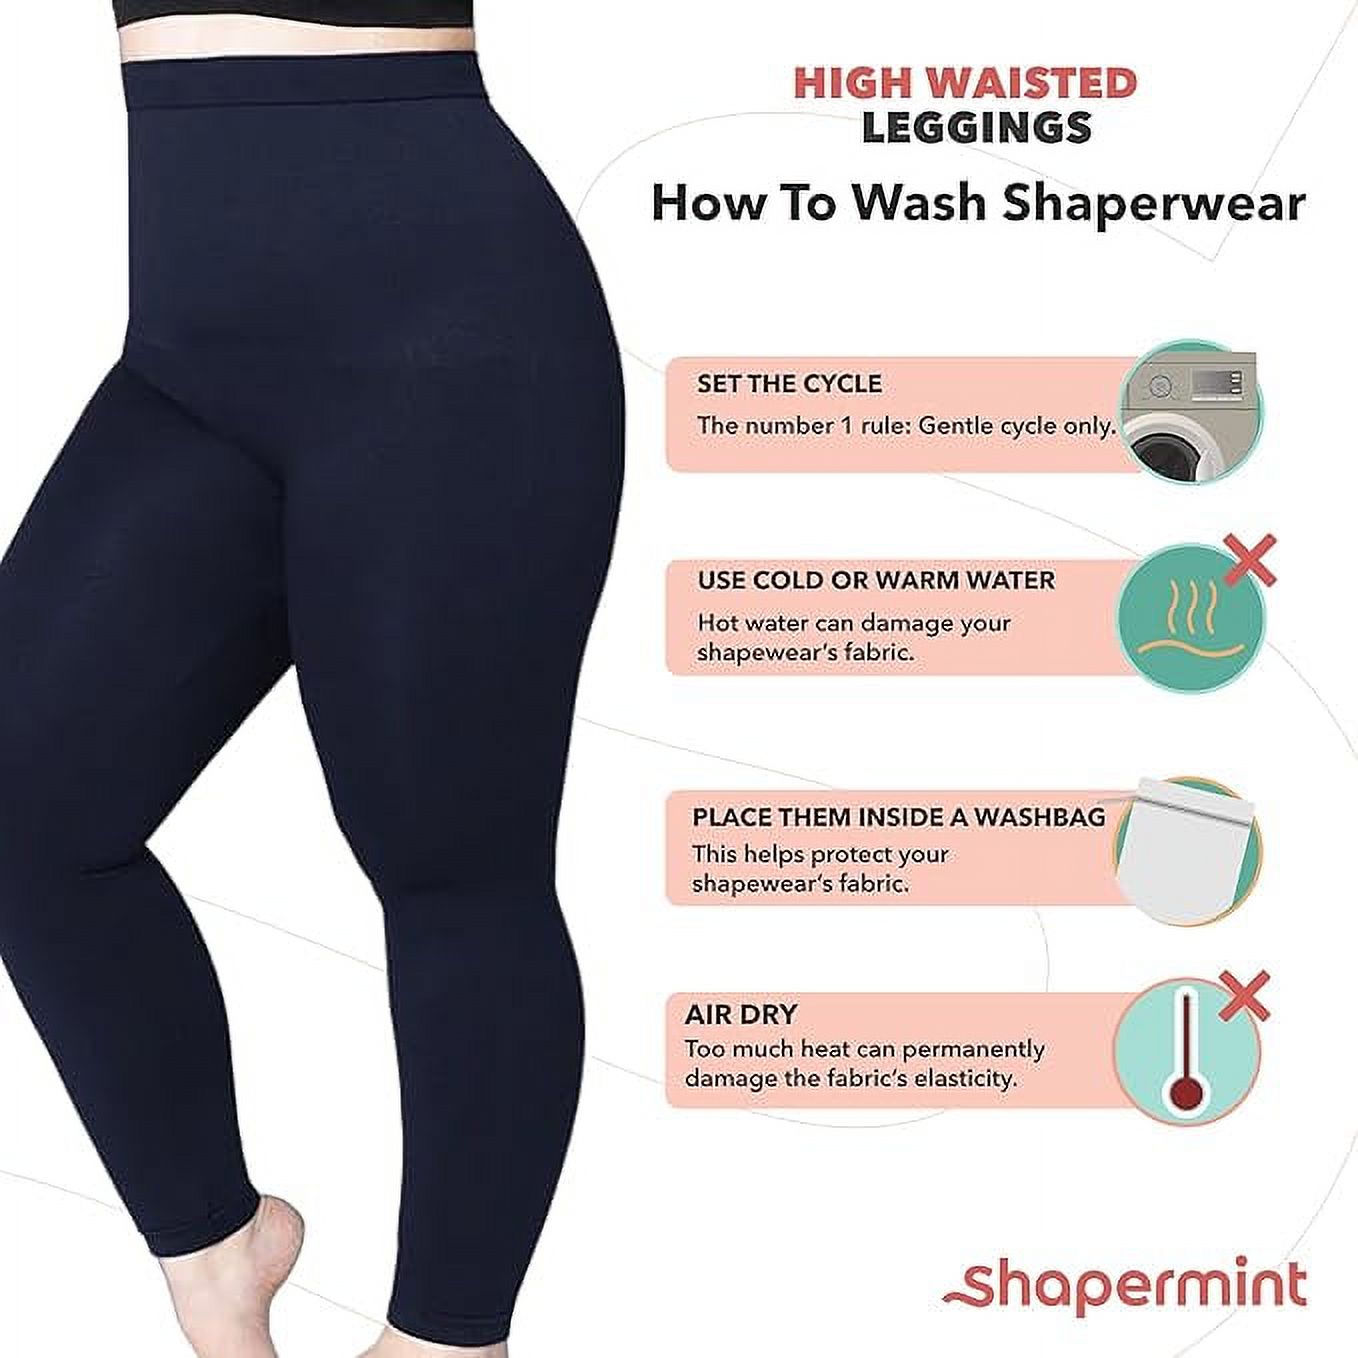 Shapermint Women’s High Waisted Shaping Leggings - image 3 of 6